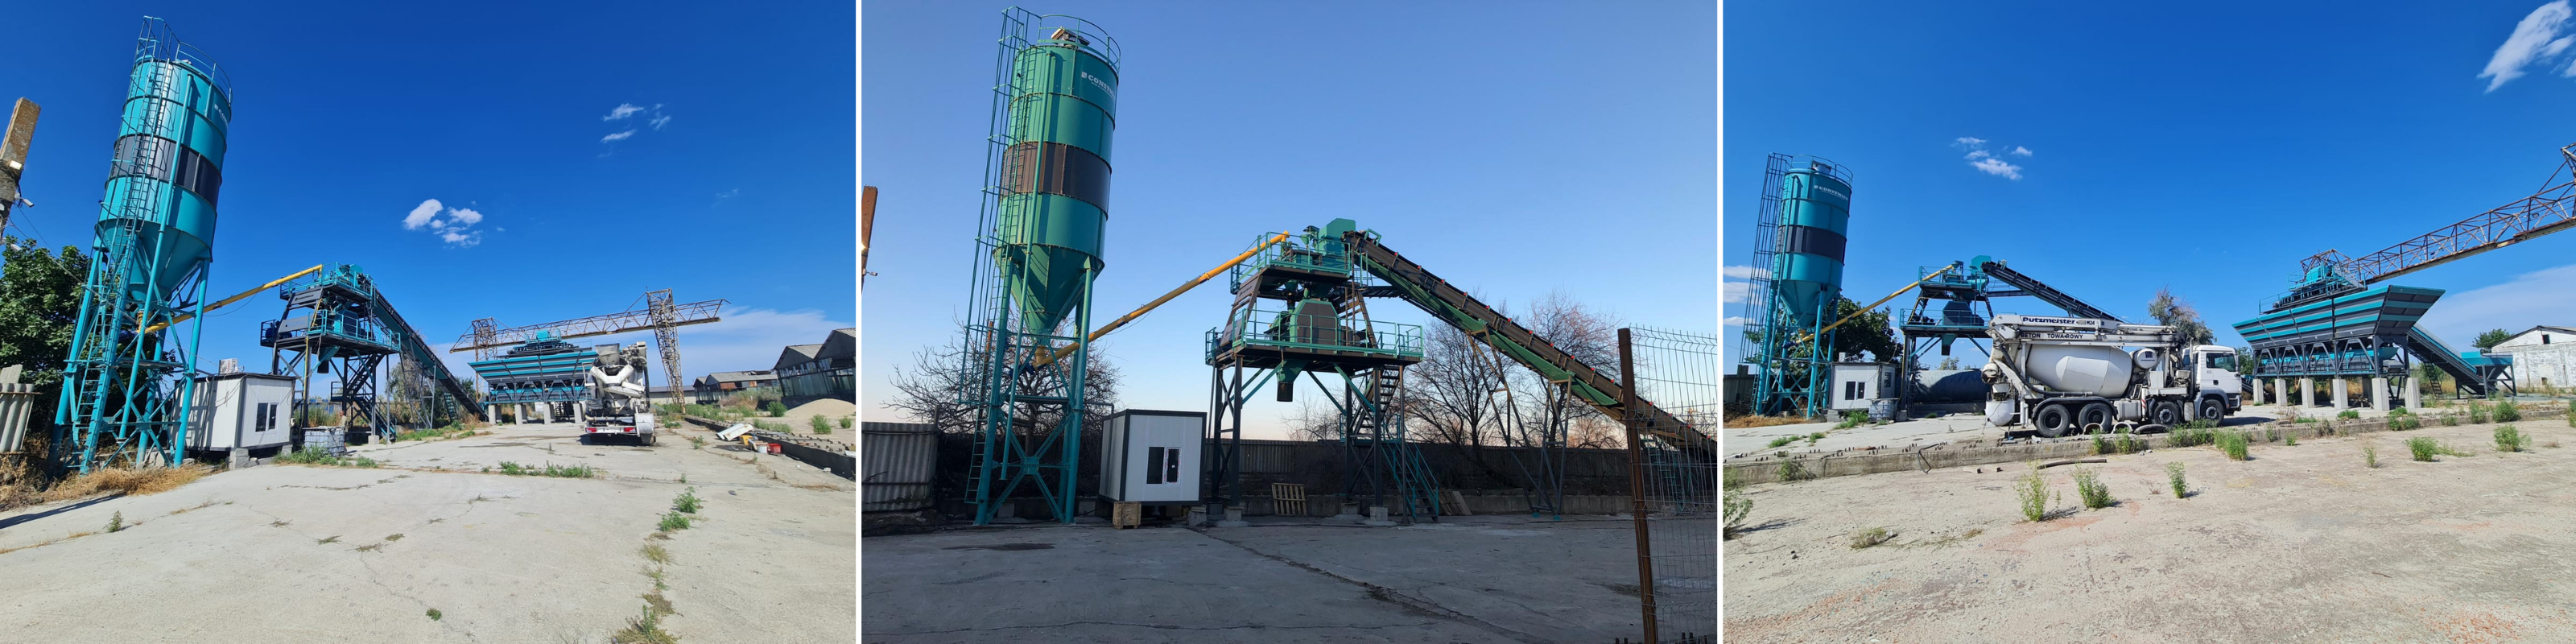 Stationary 60 | Stationary Concrete Batching Plant | Constmach 1